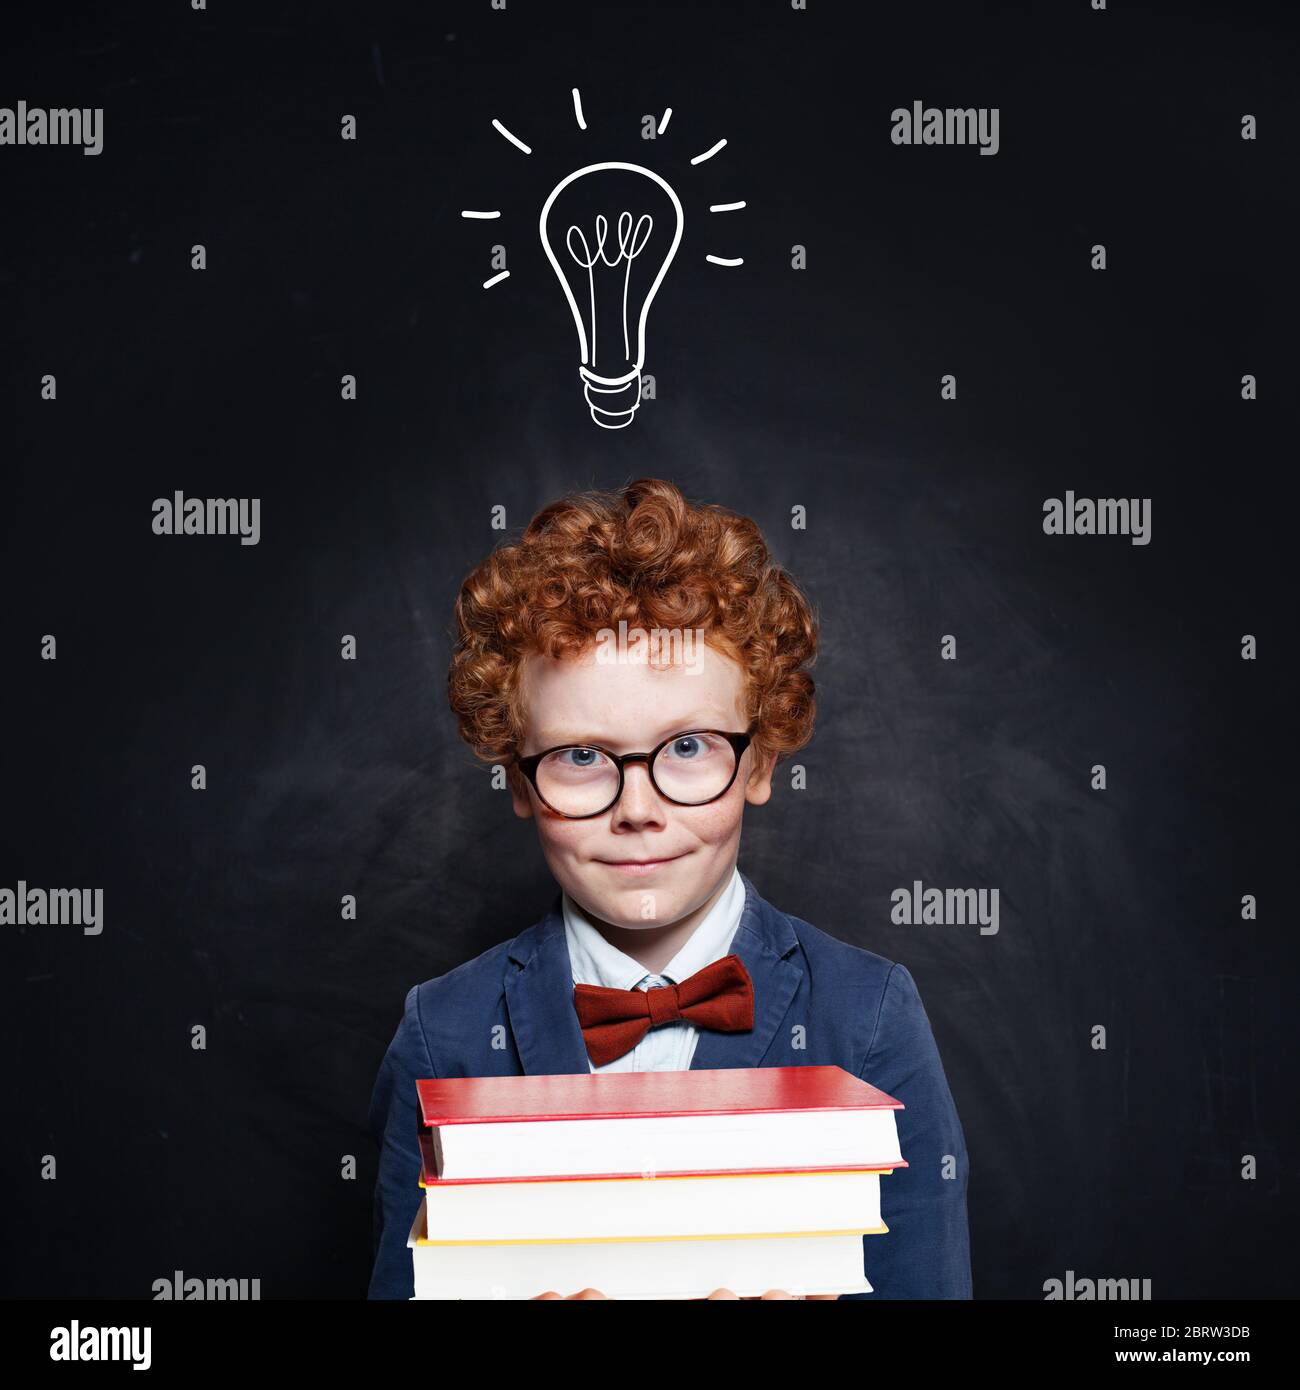 Happy kid with ginger hair holding stacks of book on school blackboard background with idea lightbulb Stock Photo